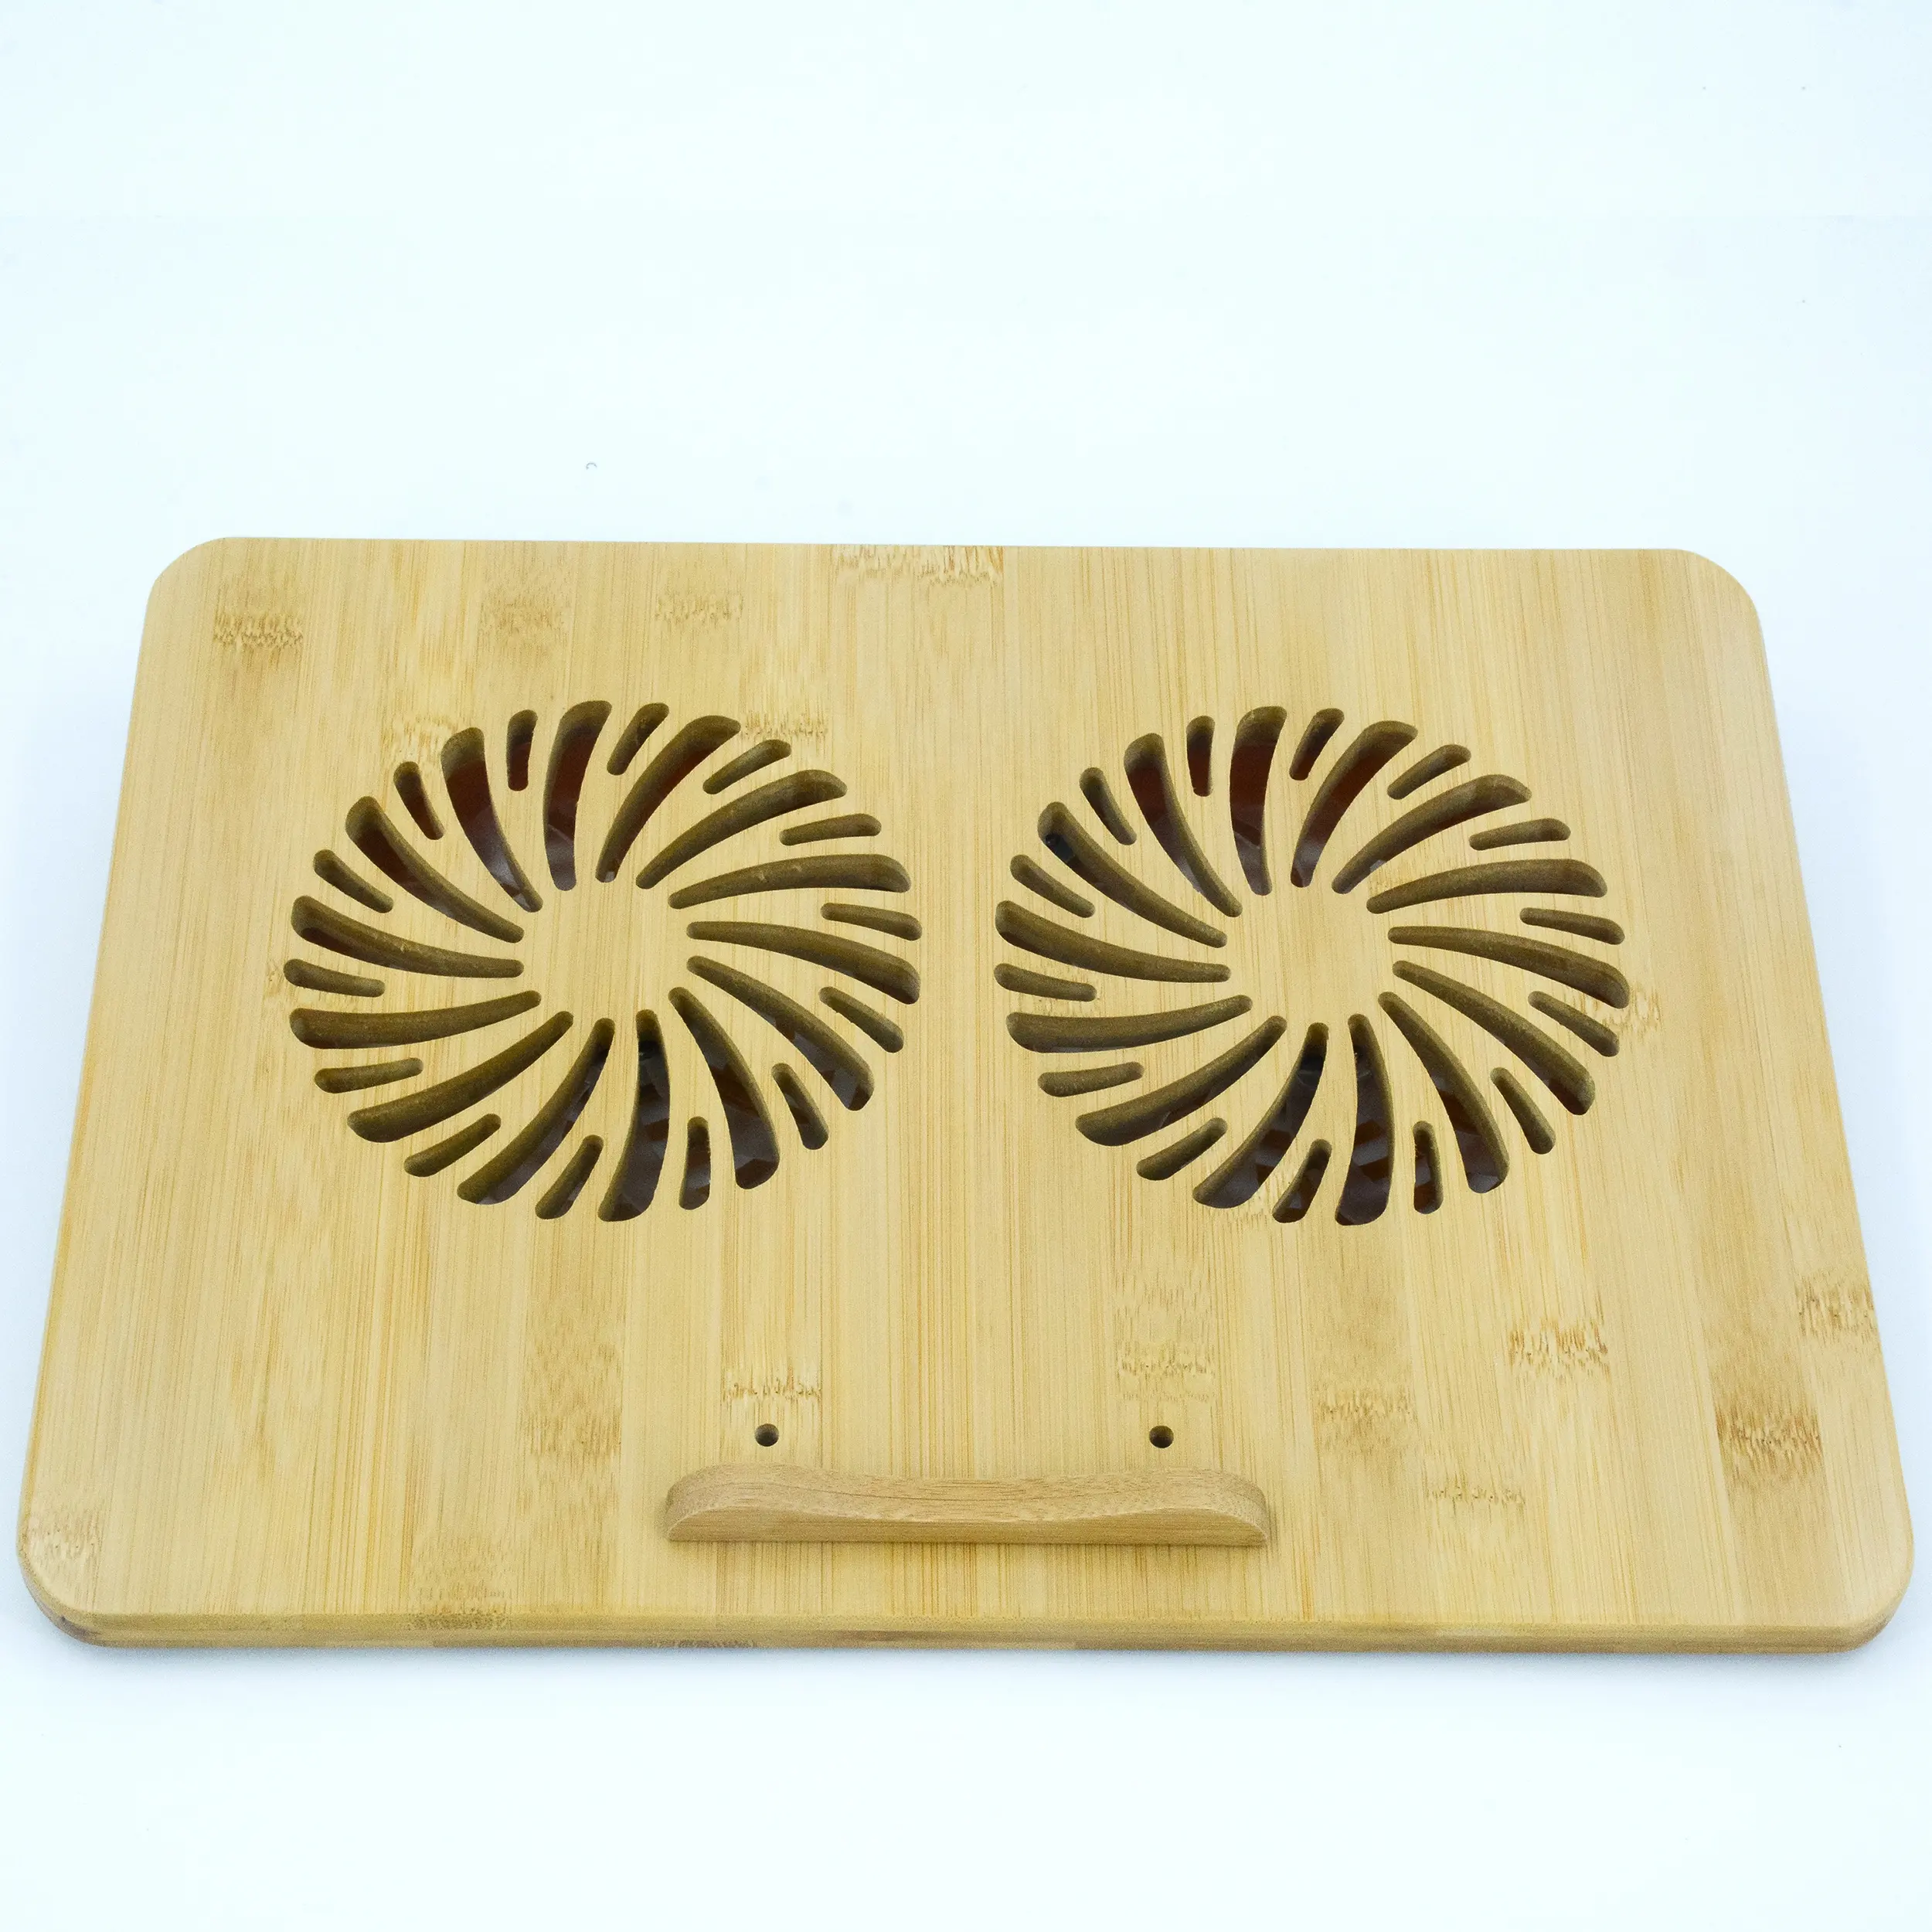 Adjustable Wooden Bamboo Laptop Cooling Pad Stand Gaming Cooler with 2 Fans